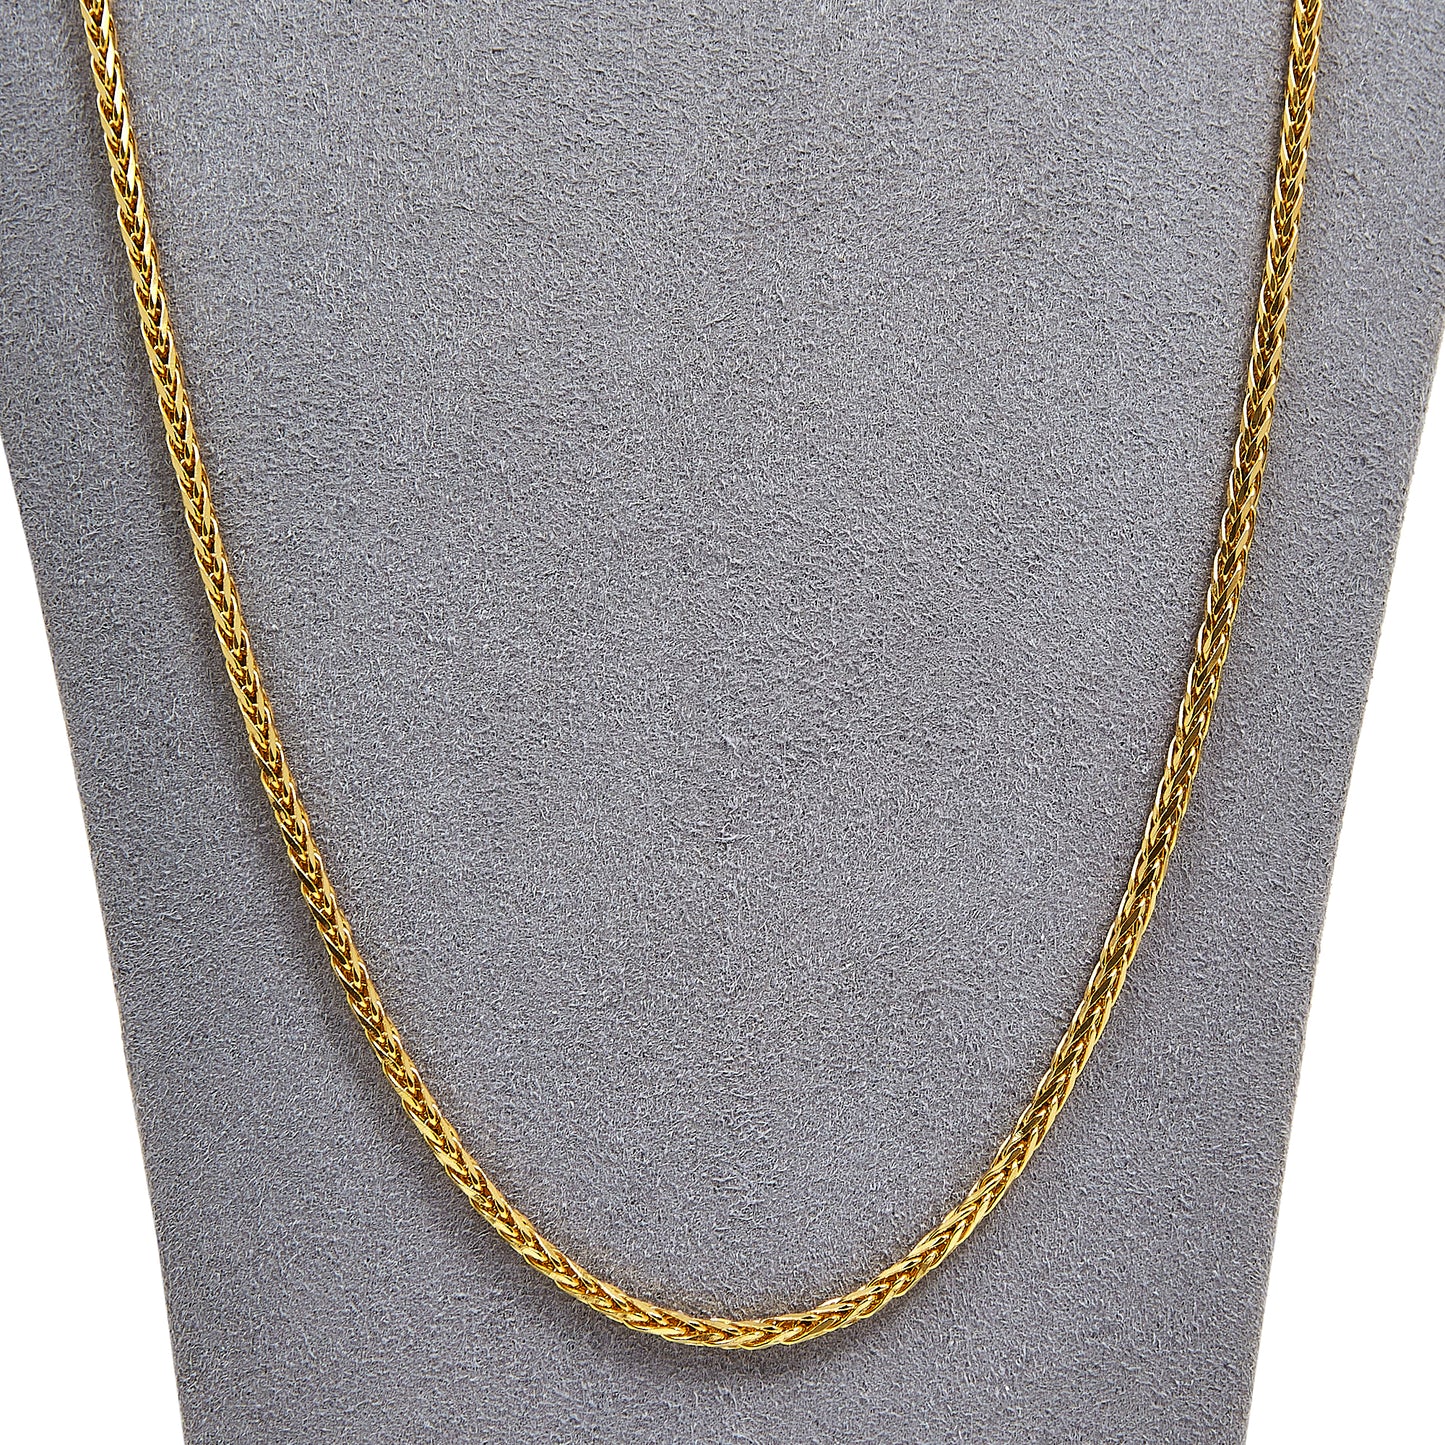 Pre-Owned 22ct Gold 26 Inch Round Foxtail Chain Necklace